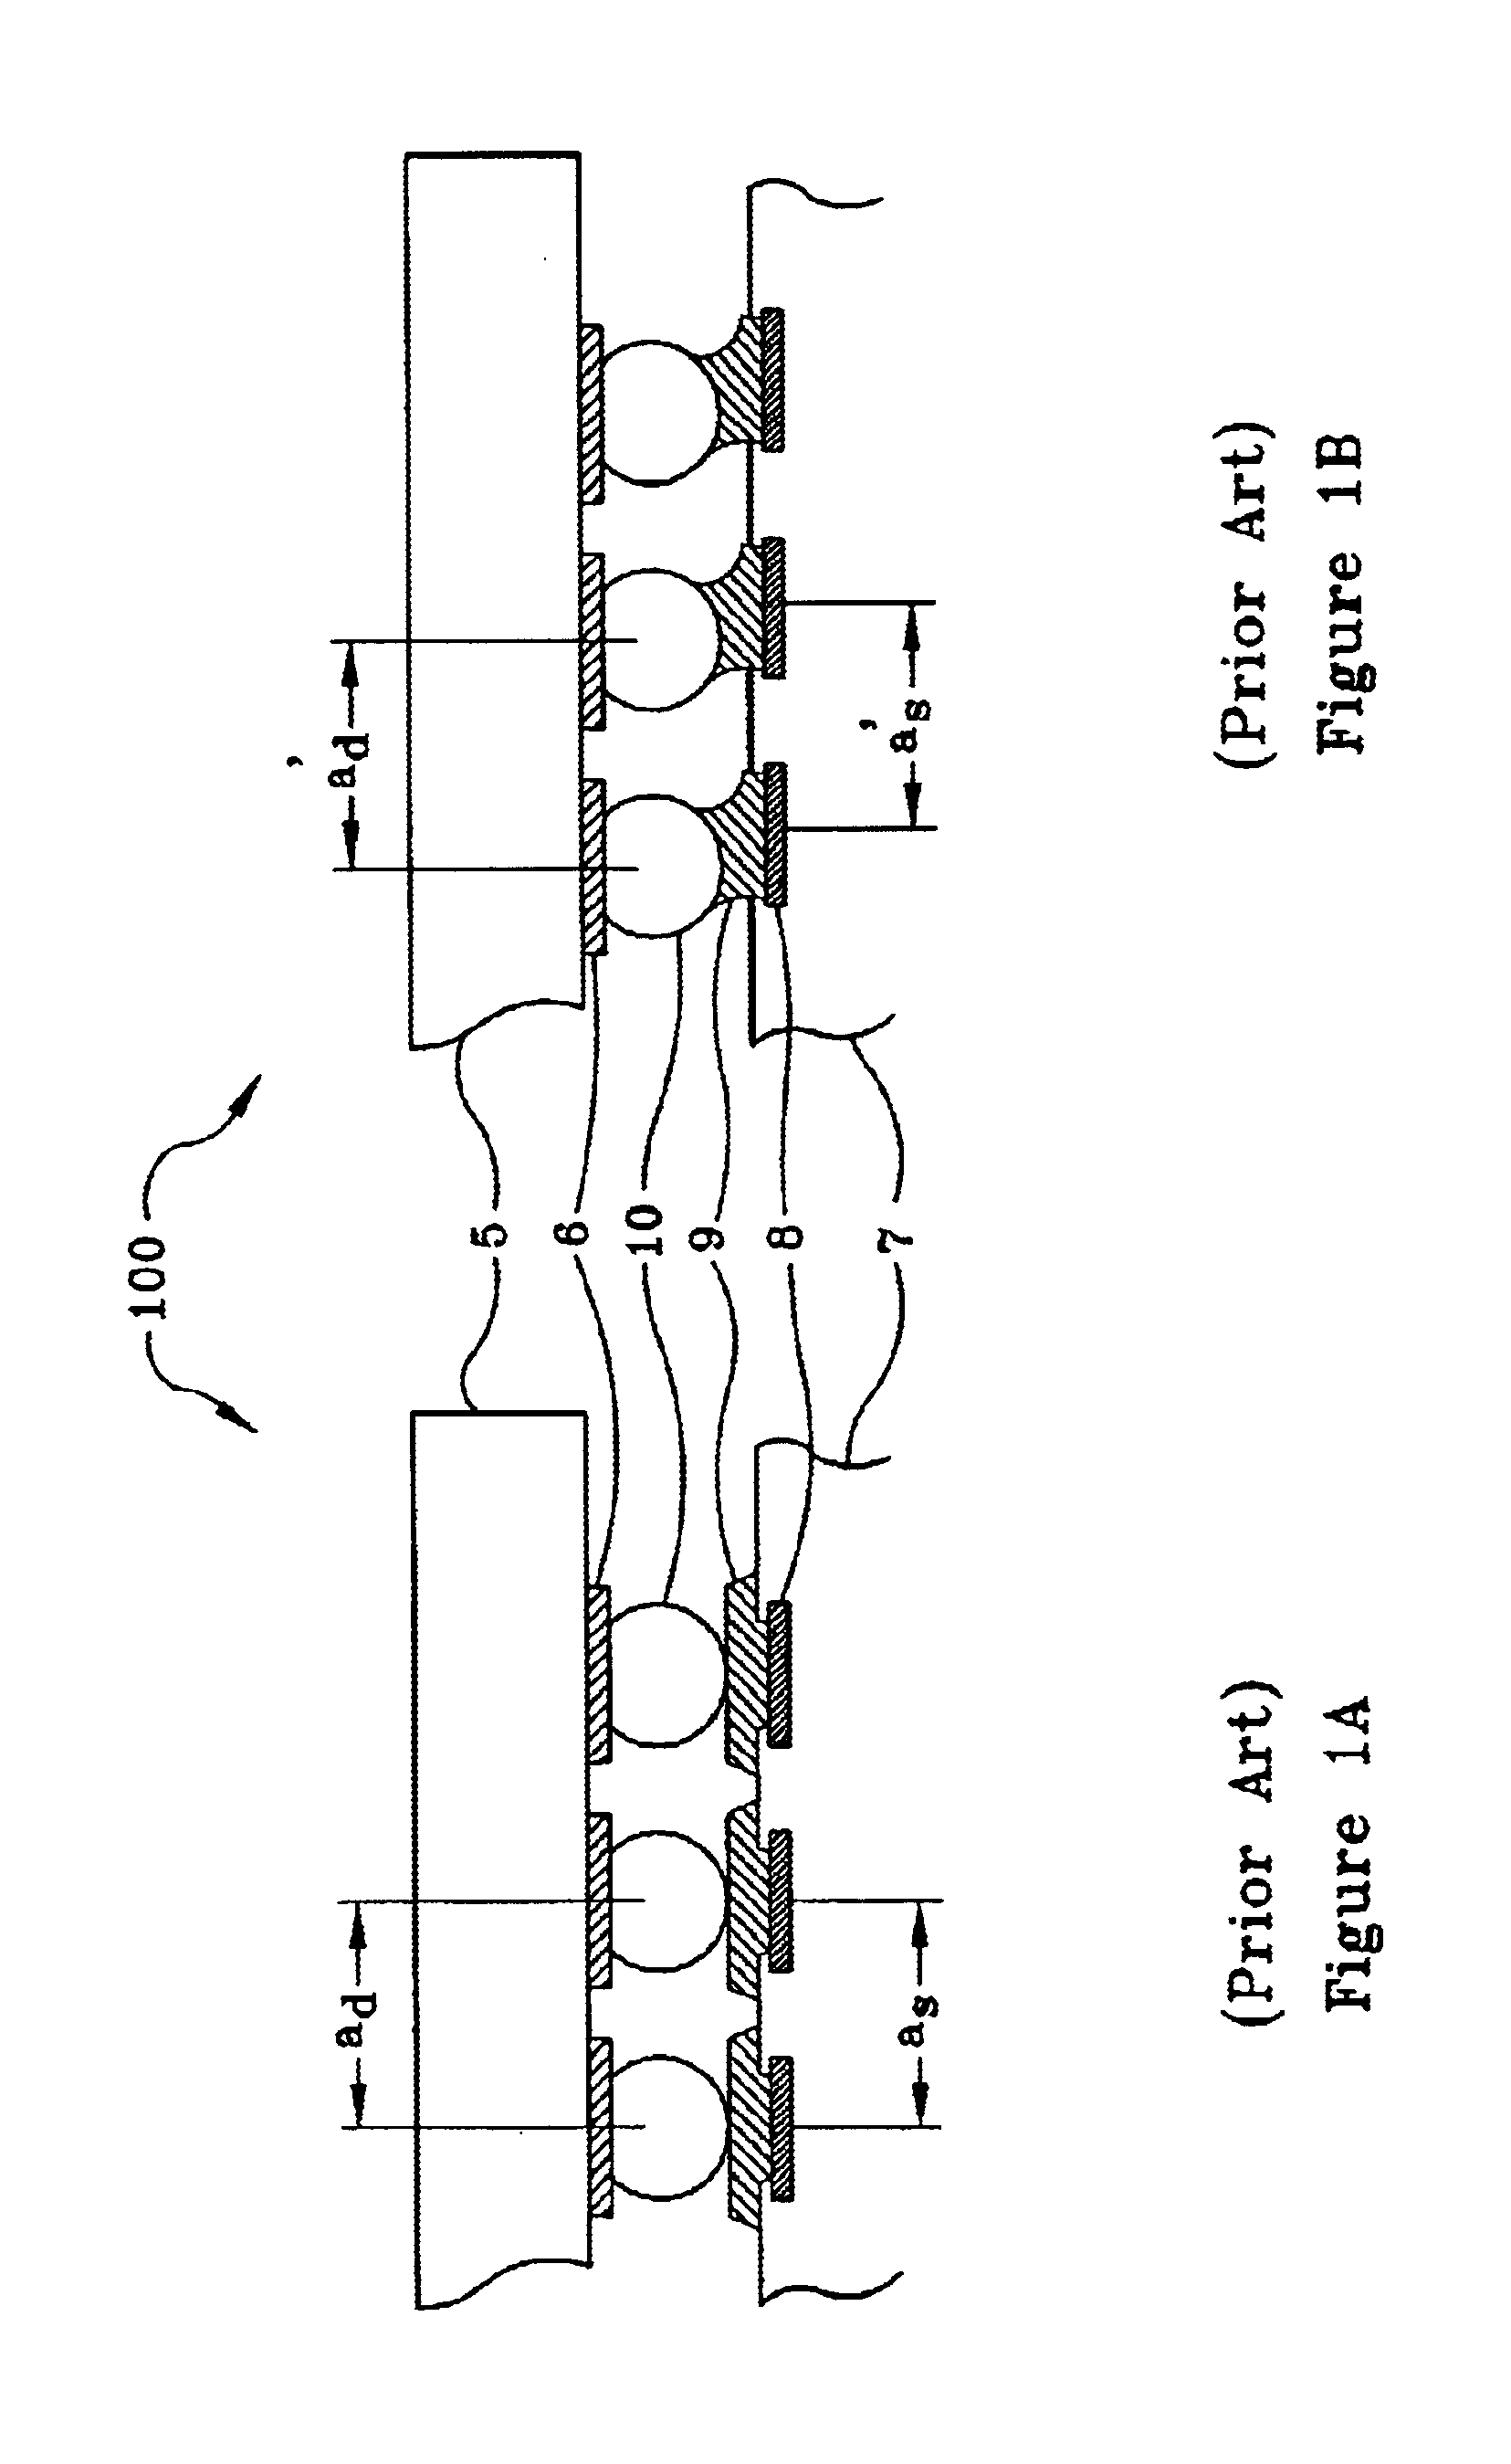 Method and apparatus for fully aligned flip-chip assembly having a variable pitch packaging substrate